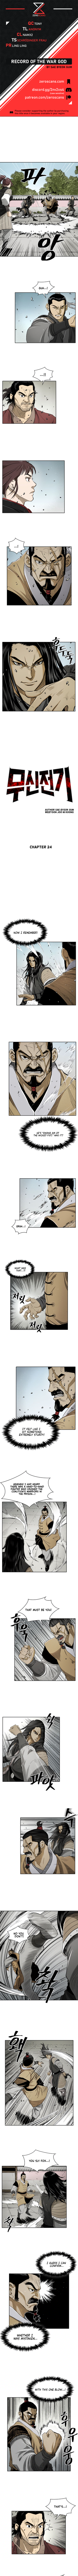 Record of the War God - Chapter 5900 - Image 1